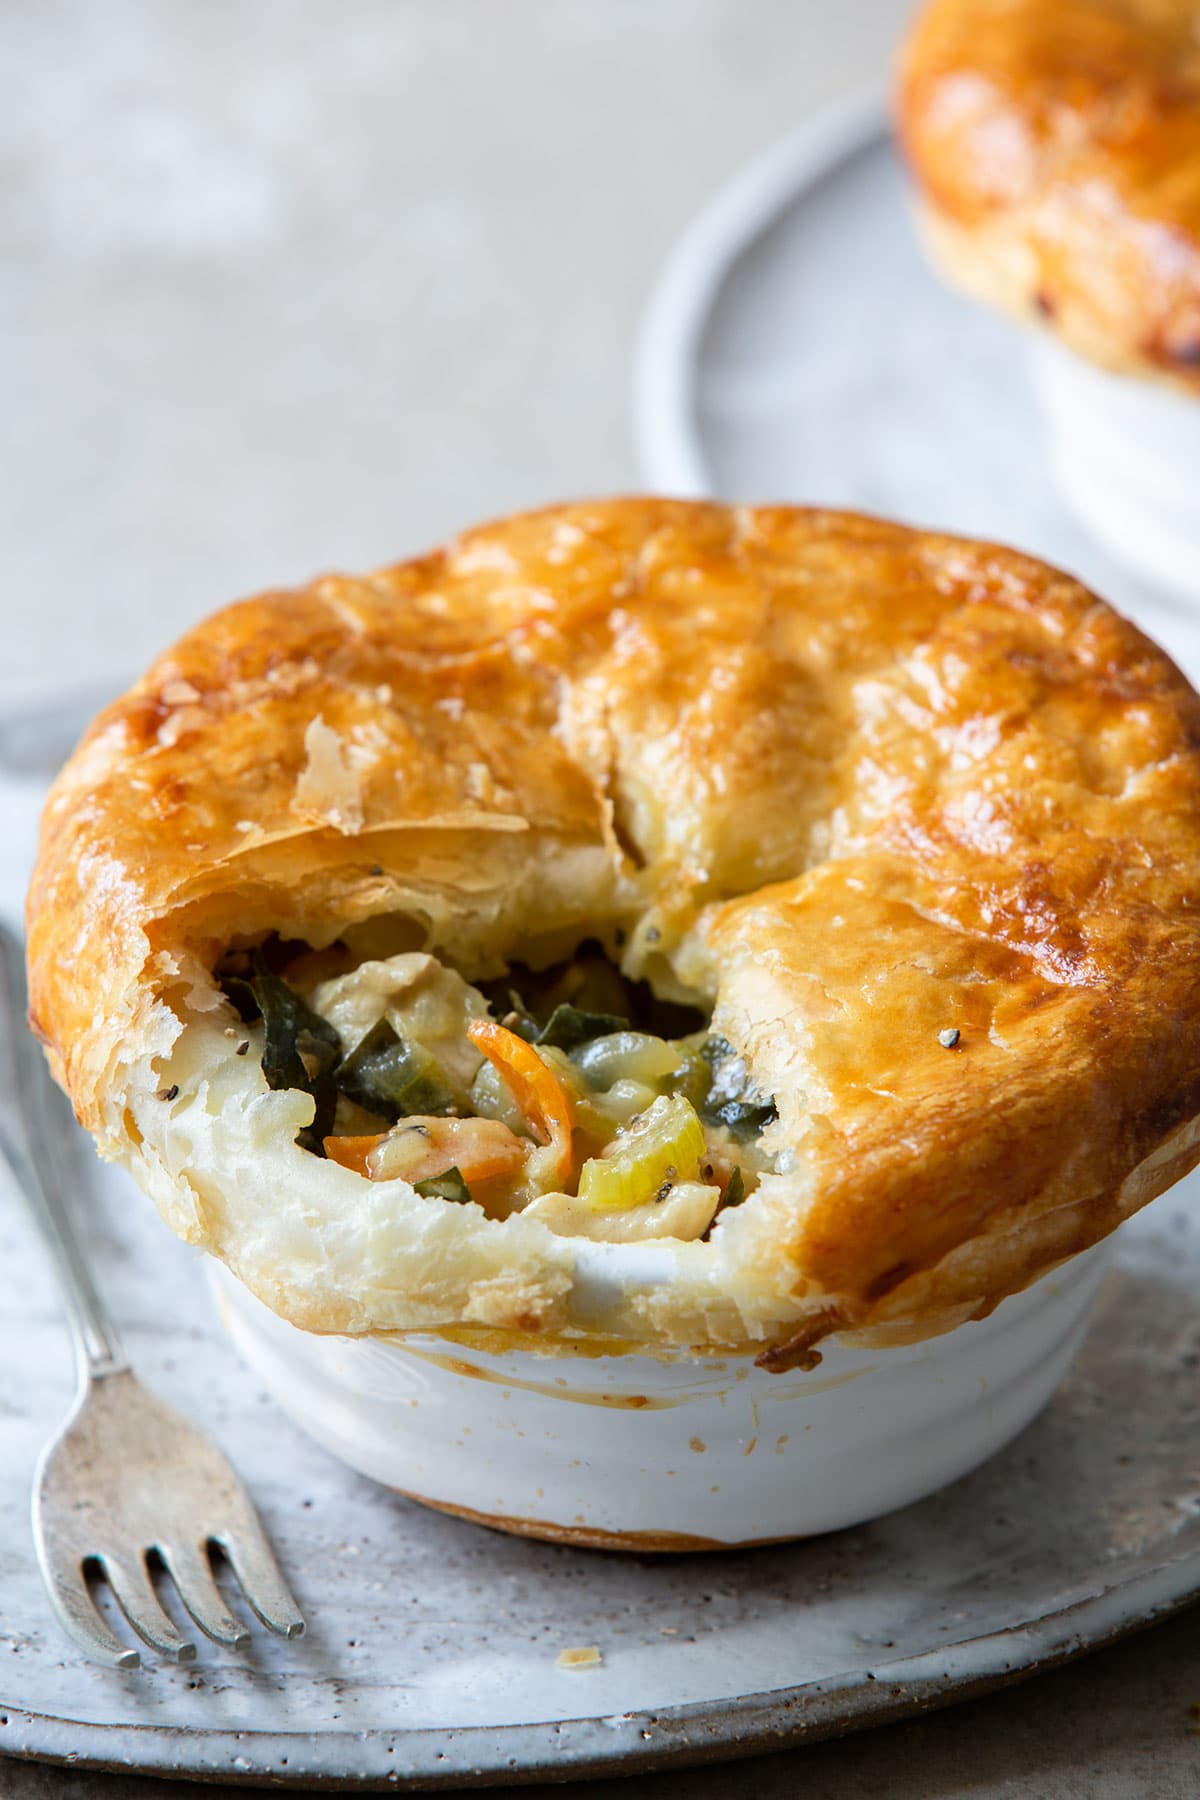 A close up shot of a potpie with its crunchy crust cut through revealing its inside savory chicken filling. 